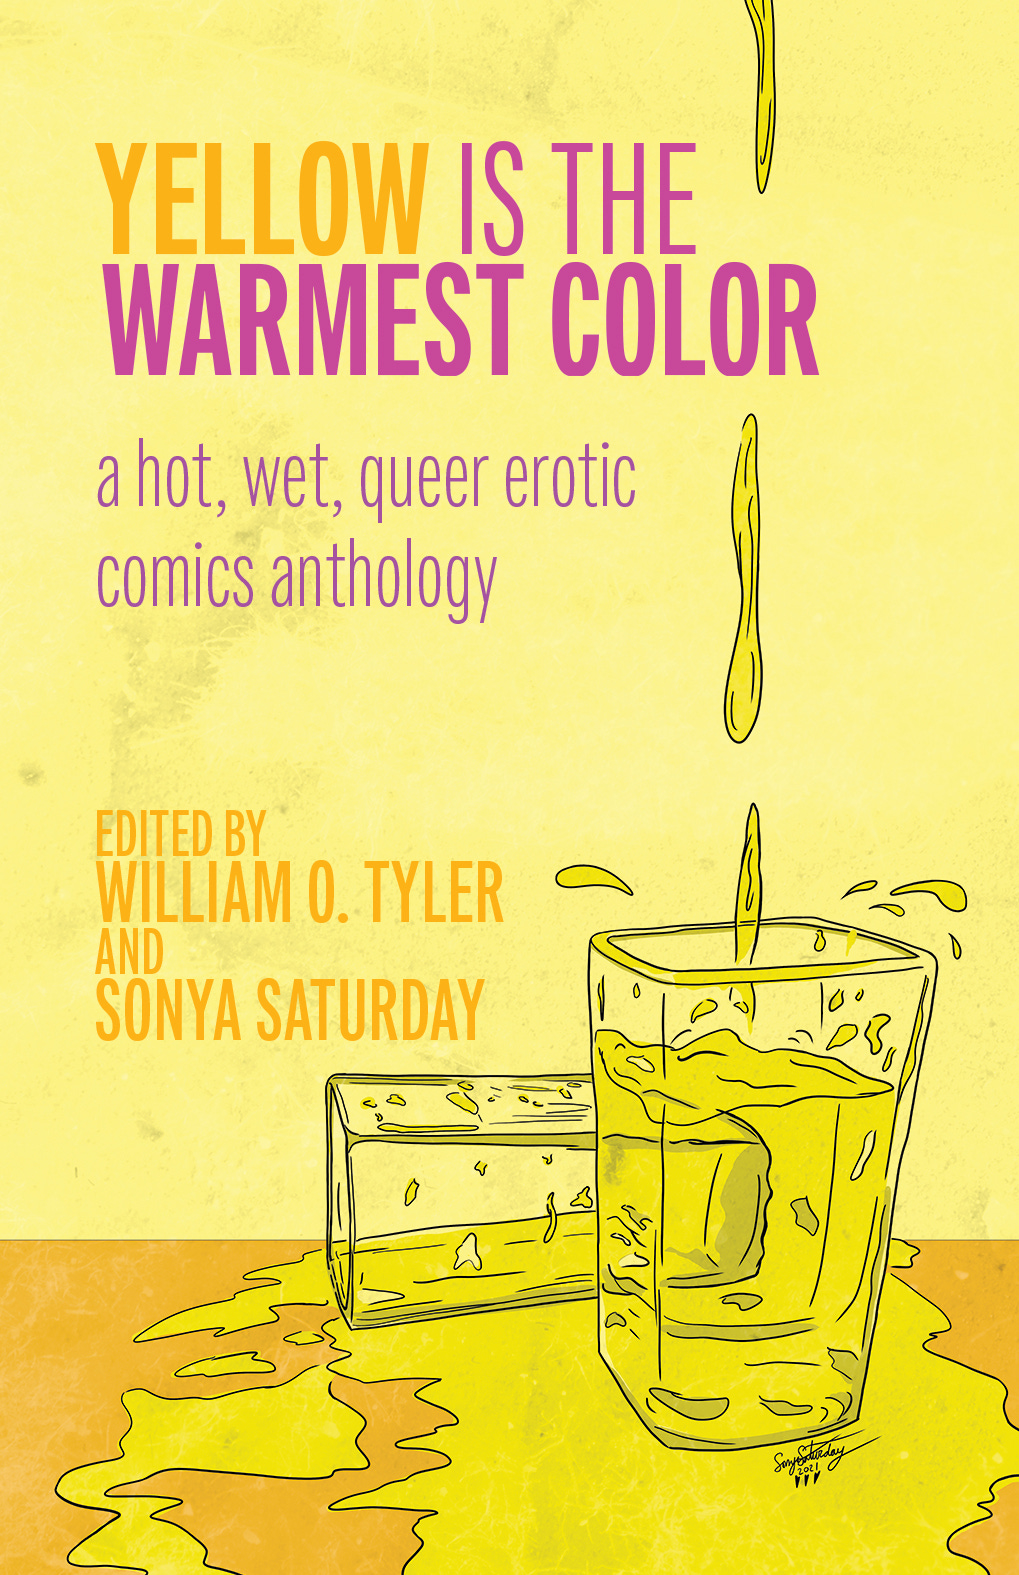 Yellow is the Warmest Color book cover, depicting yellow liquid splashing into and around two shot glasses